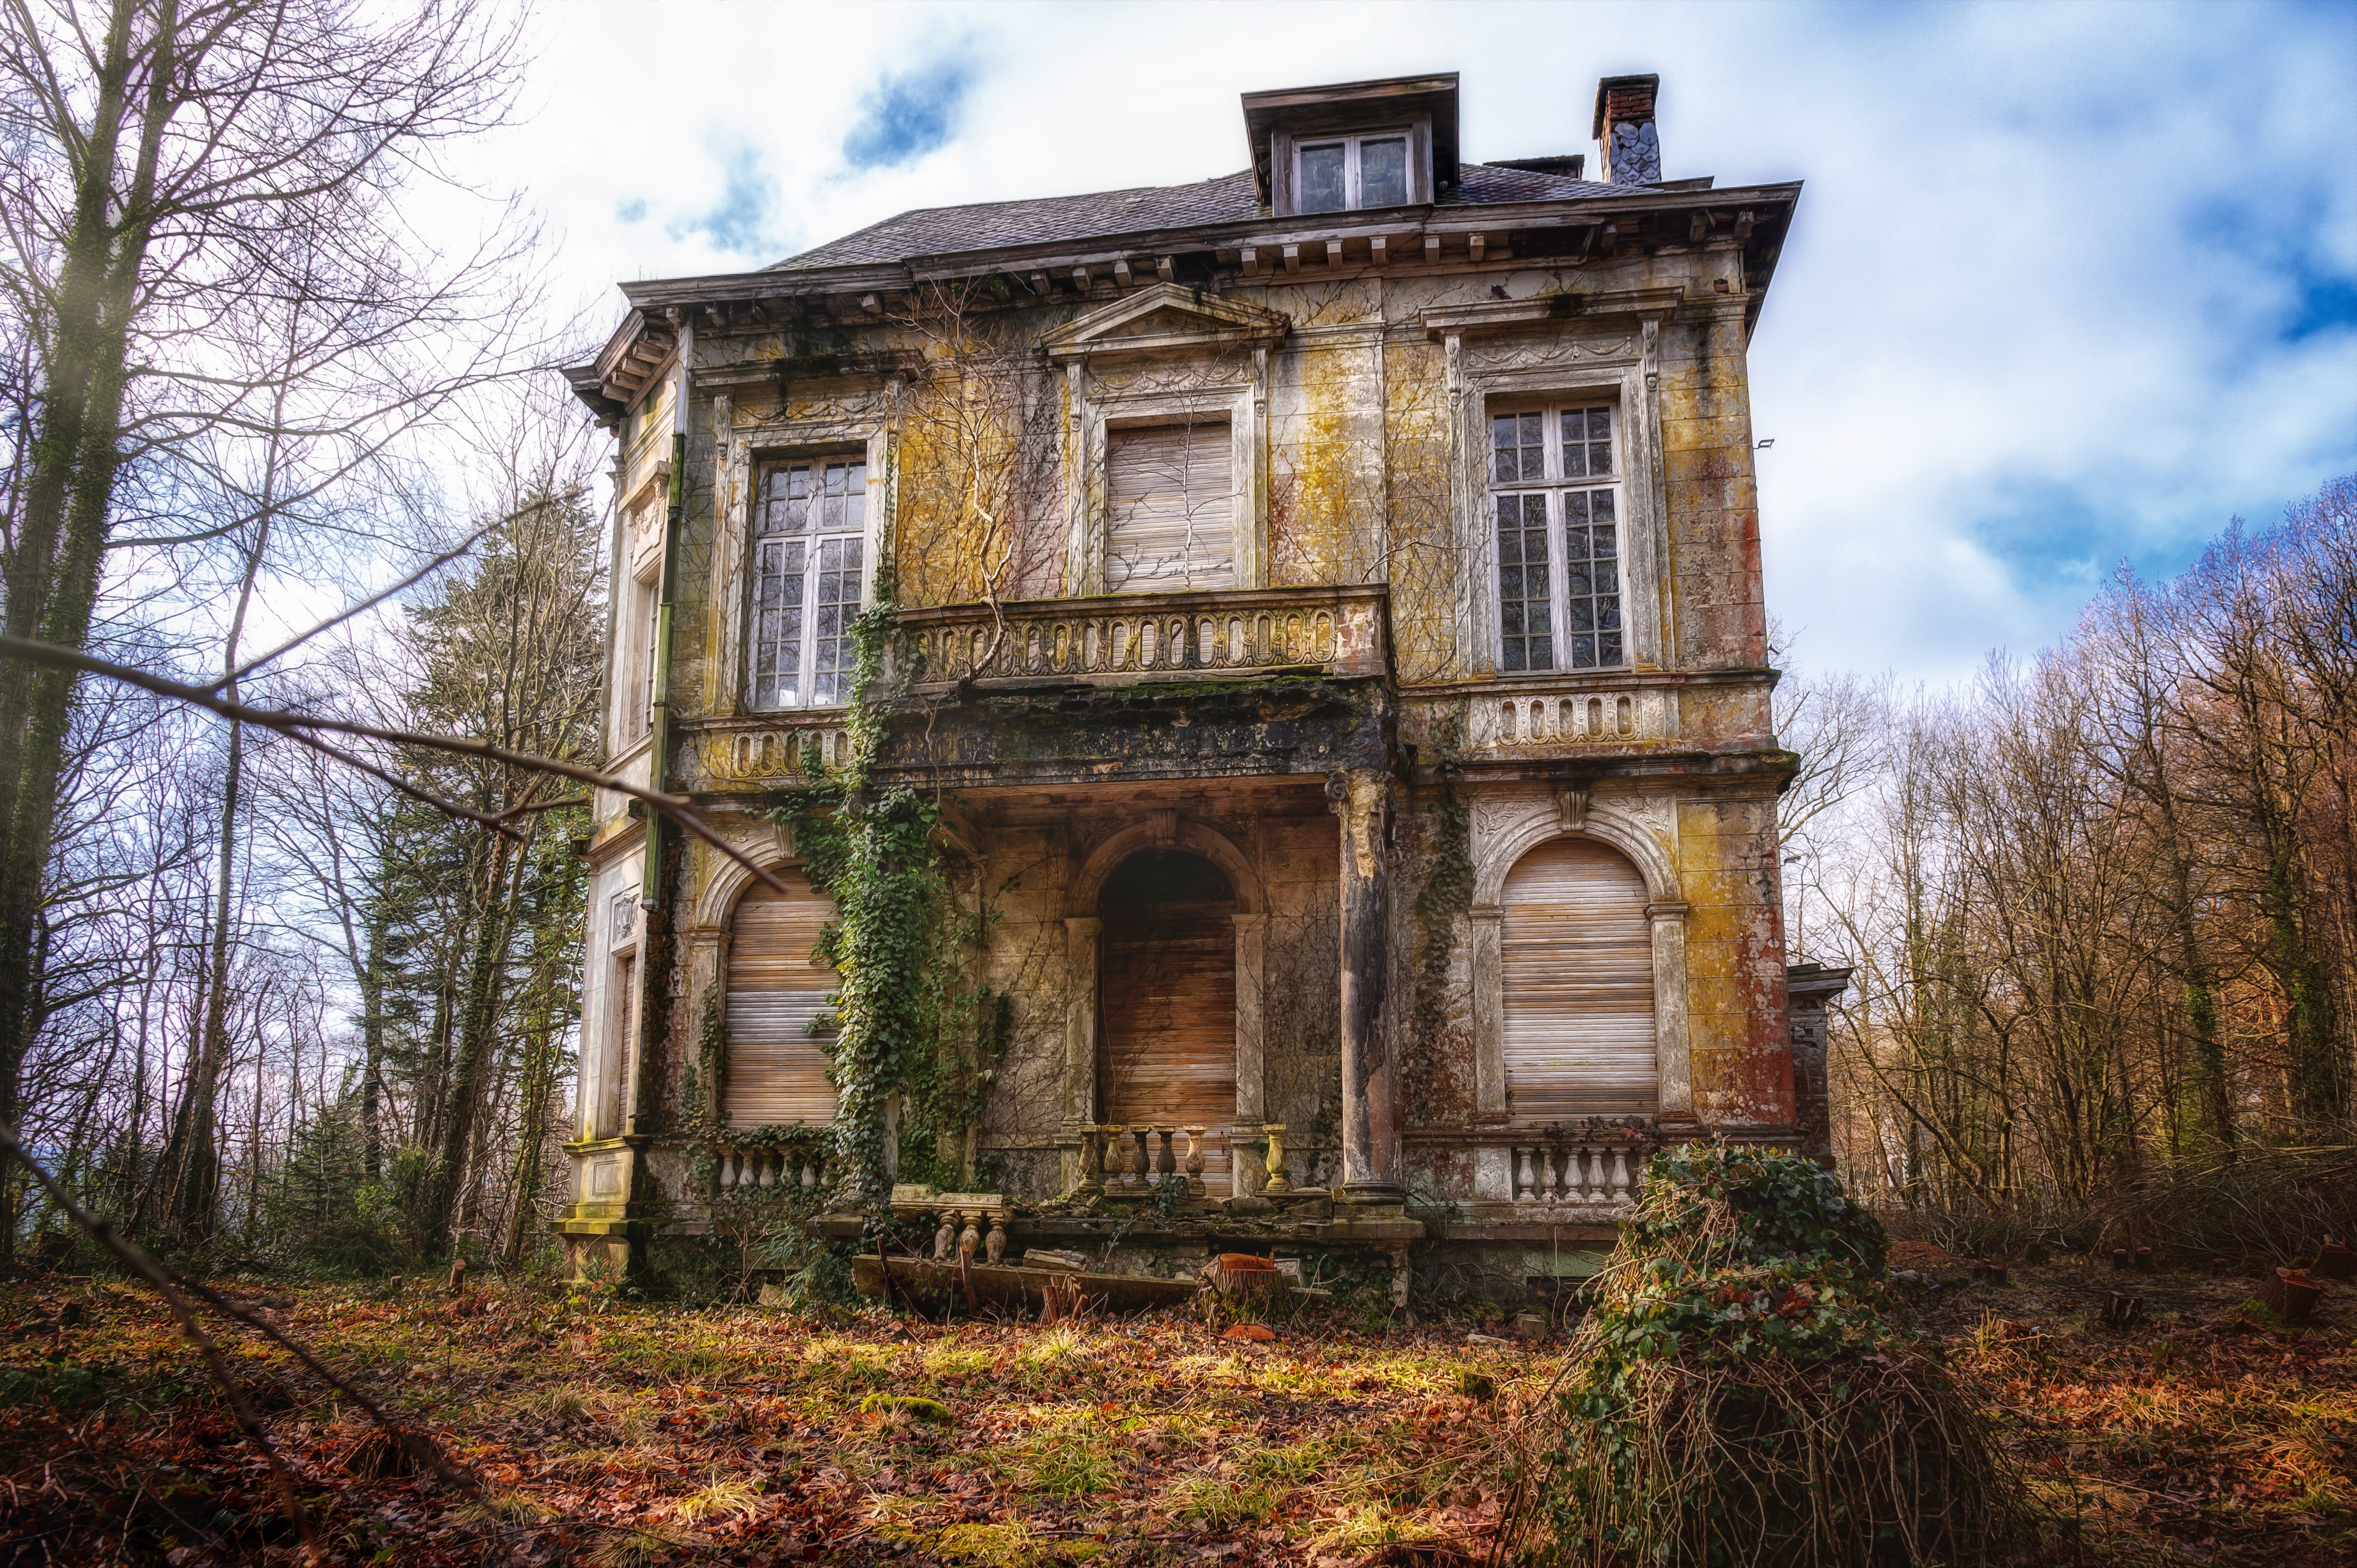 Justin saw Miss Watkins go into an old abandoned house. | Source: Unsplash